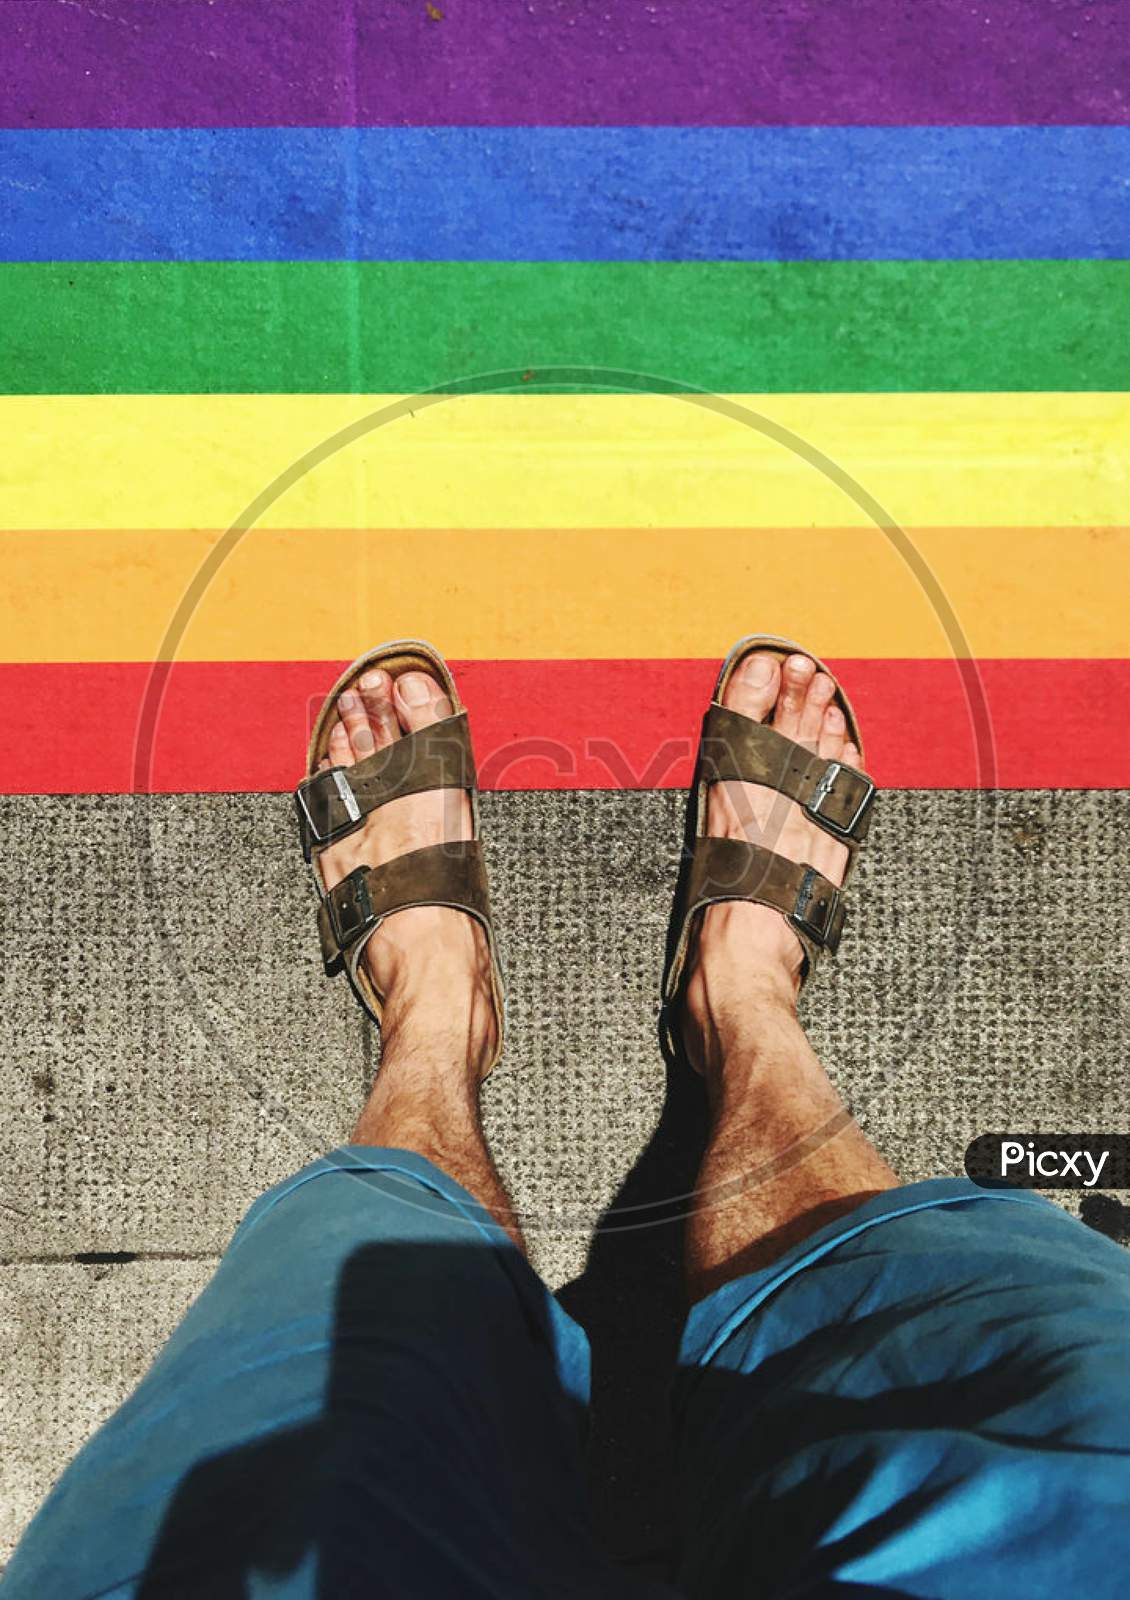 Rainbow carpet and slippers totes And legs